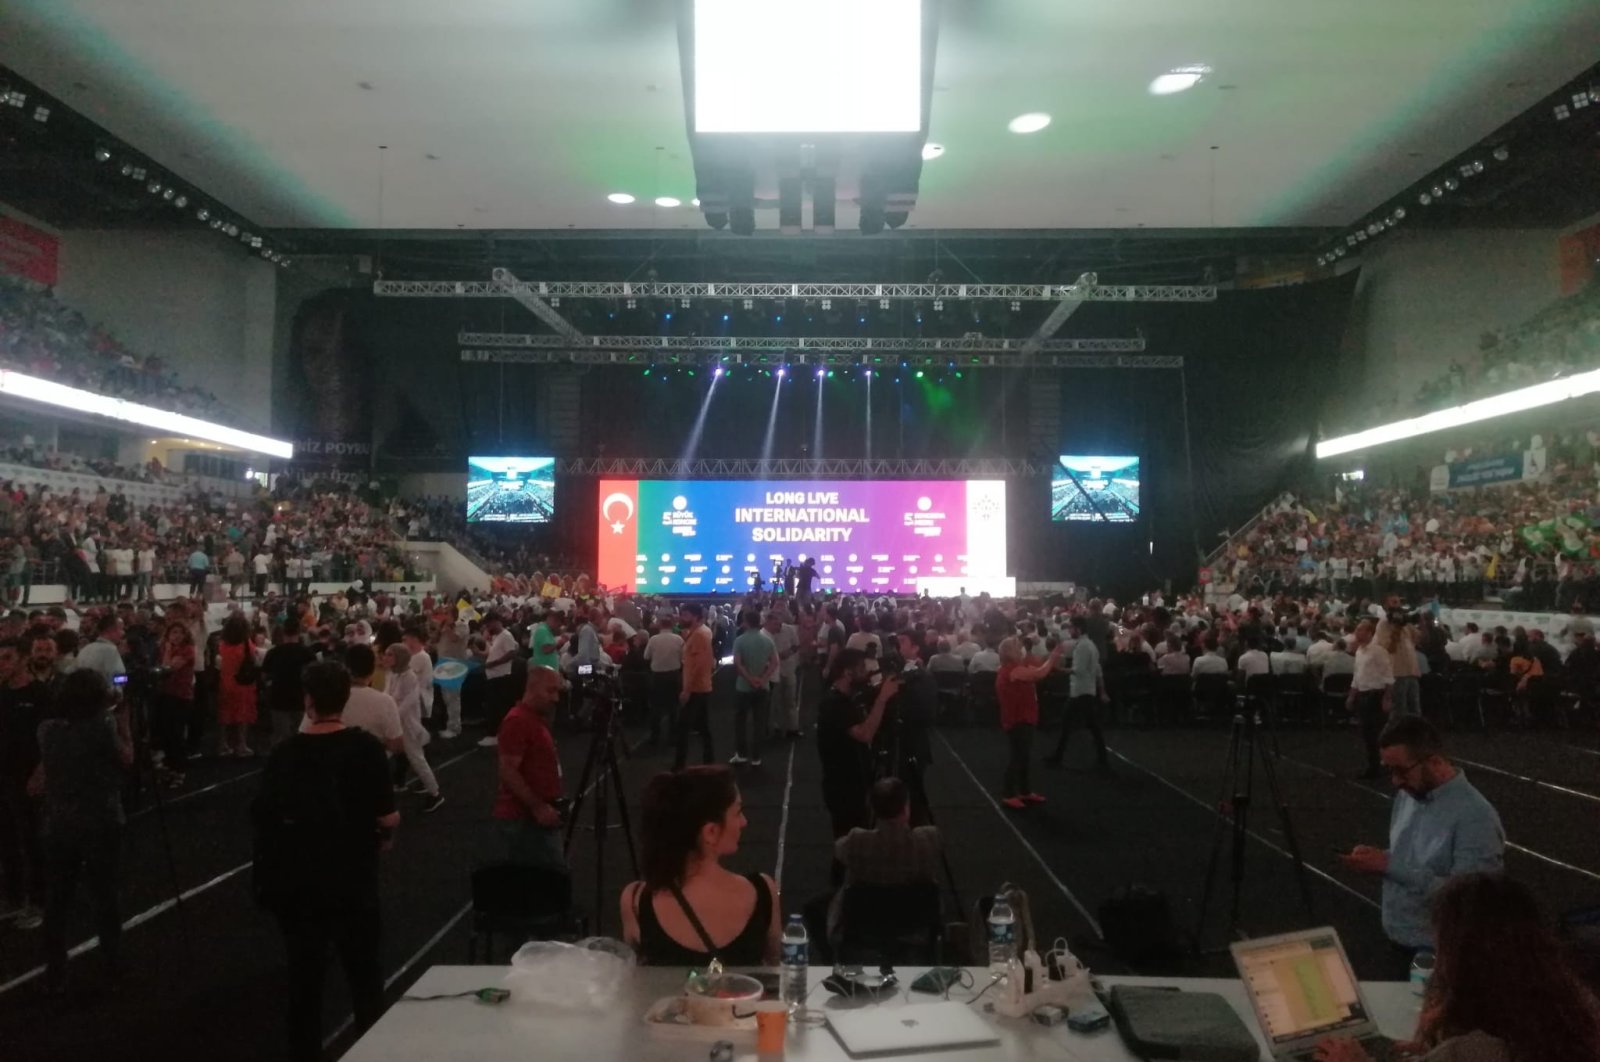 The Peoples Democratic Party (HDP) holds the 5th Ordinary Congress in the capital Ankara, July 3, 2022. (IHA Photo)